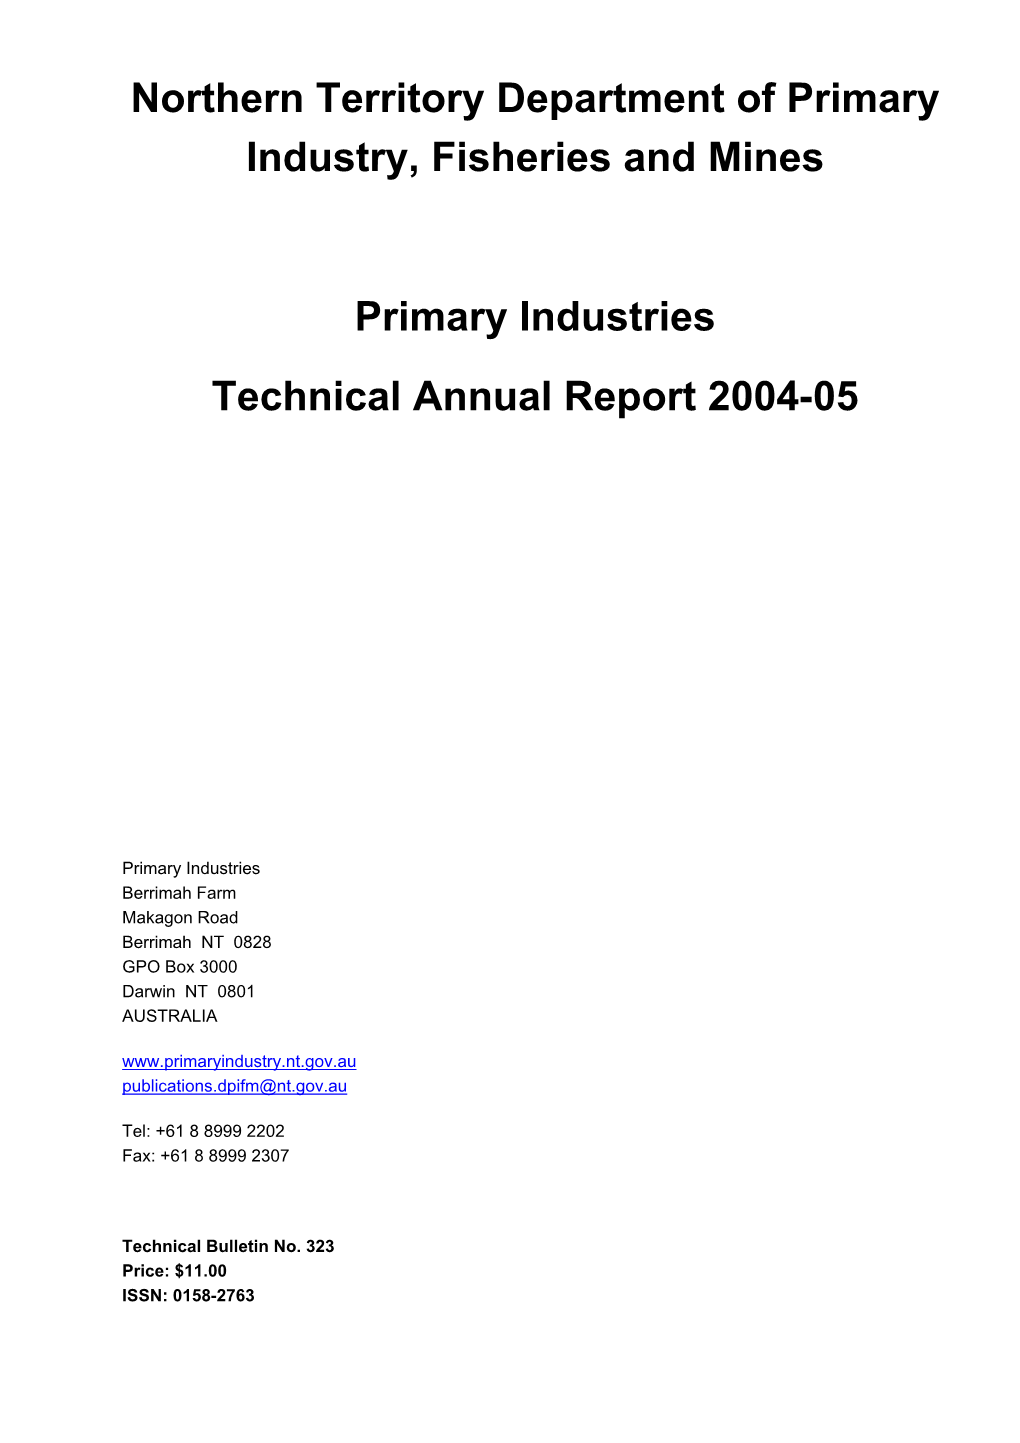 Technical Annual Report 2004-05